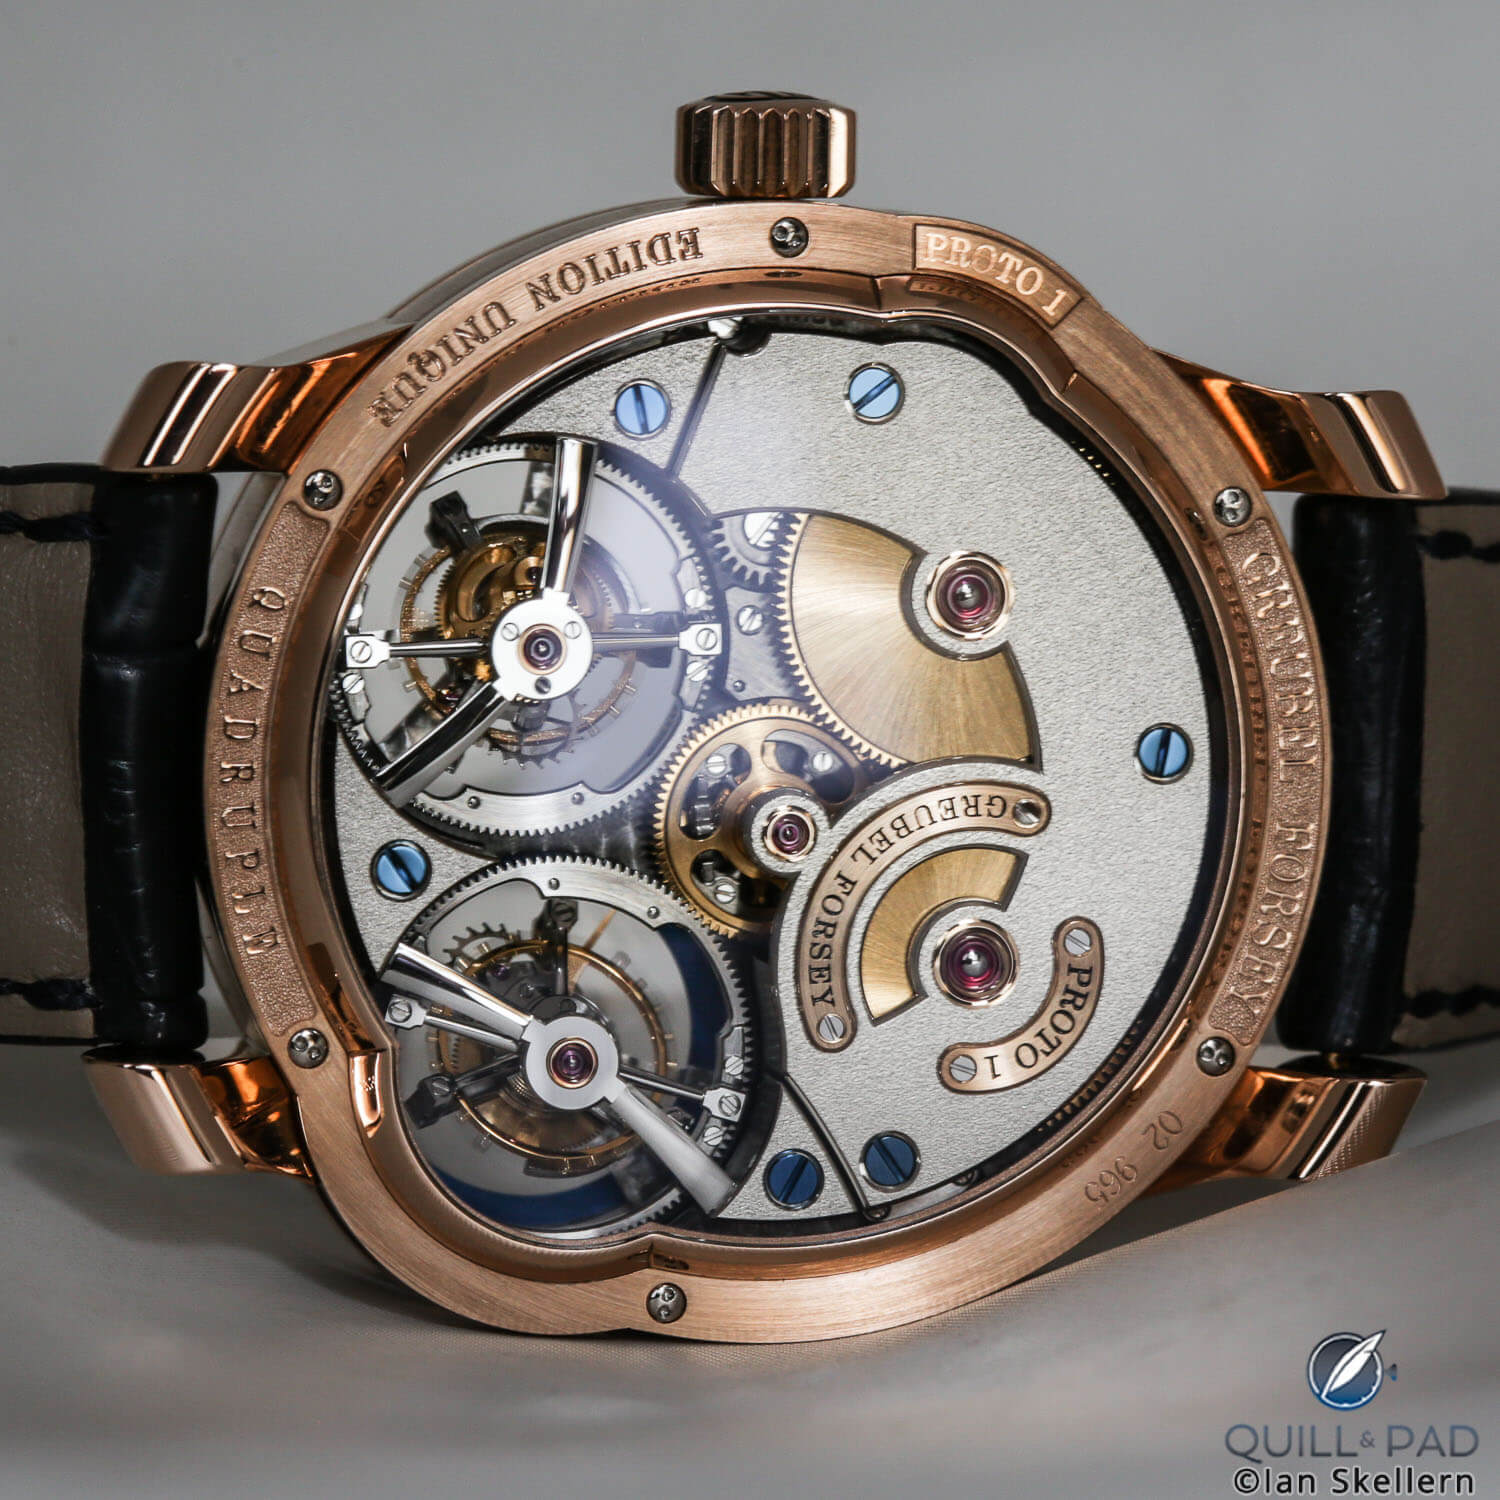 View through the display back of the Greubel Forsey Quadruple Tourbillon Blue